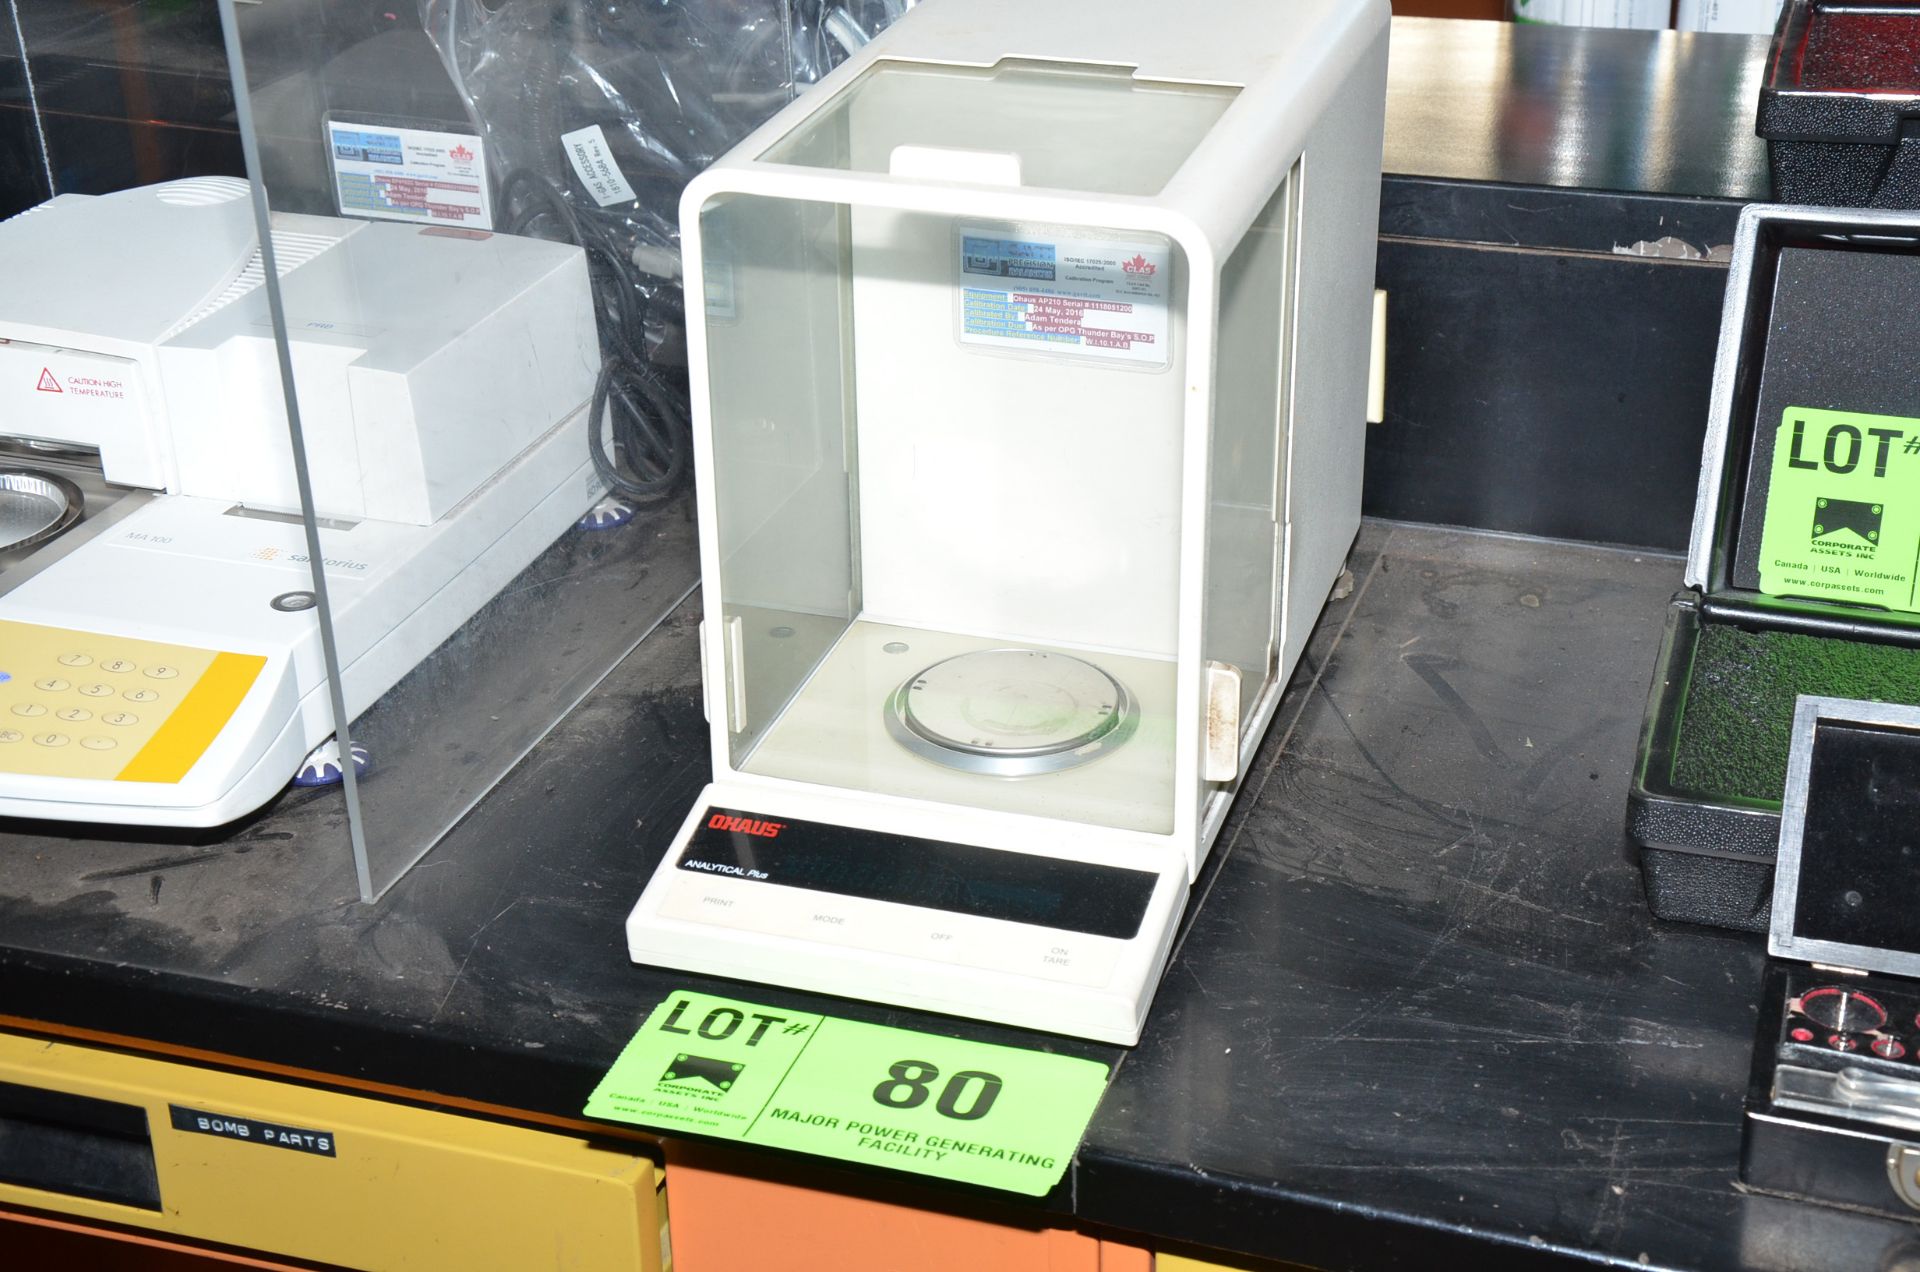 OHAUS ANALYTICAL BALANCE SCALE WITH DRAFT SHIELD, S/N N/A [RIGGING FEE FOR LOT #80 - $25 USD PLUS